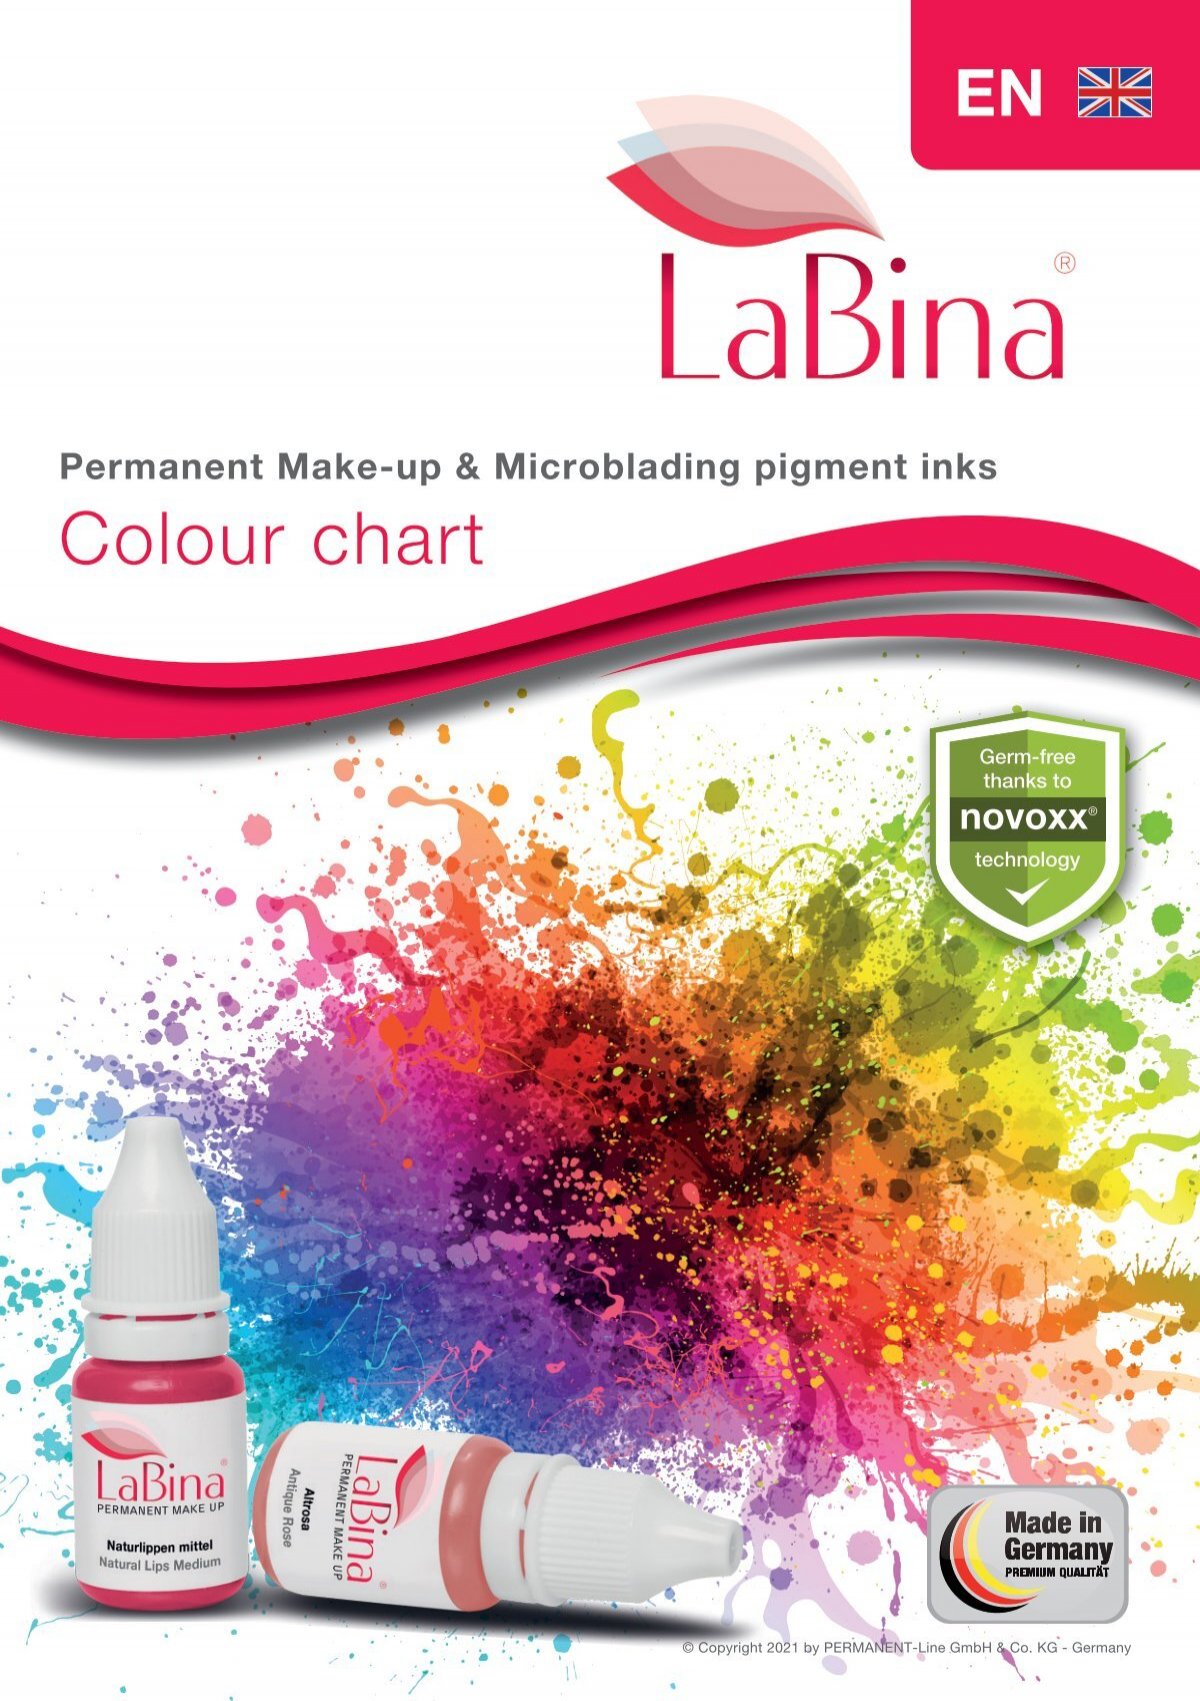 EN - LaBina Pigment Inks - Colour Chart - Permanent Make-up and Microblading